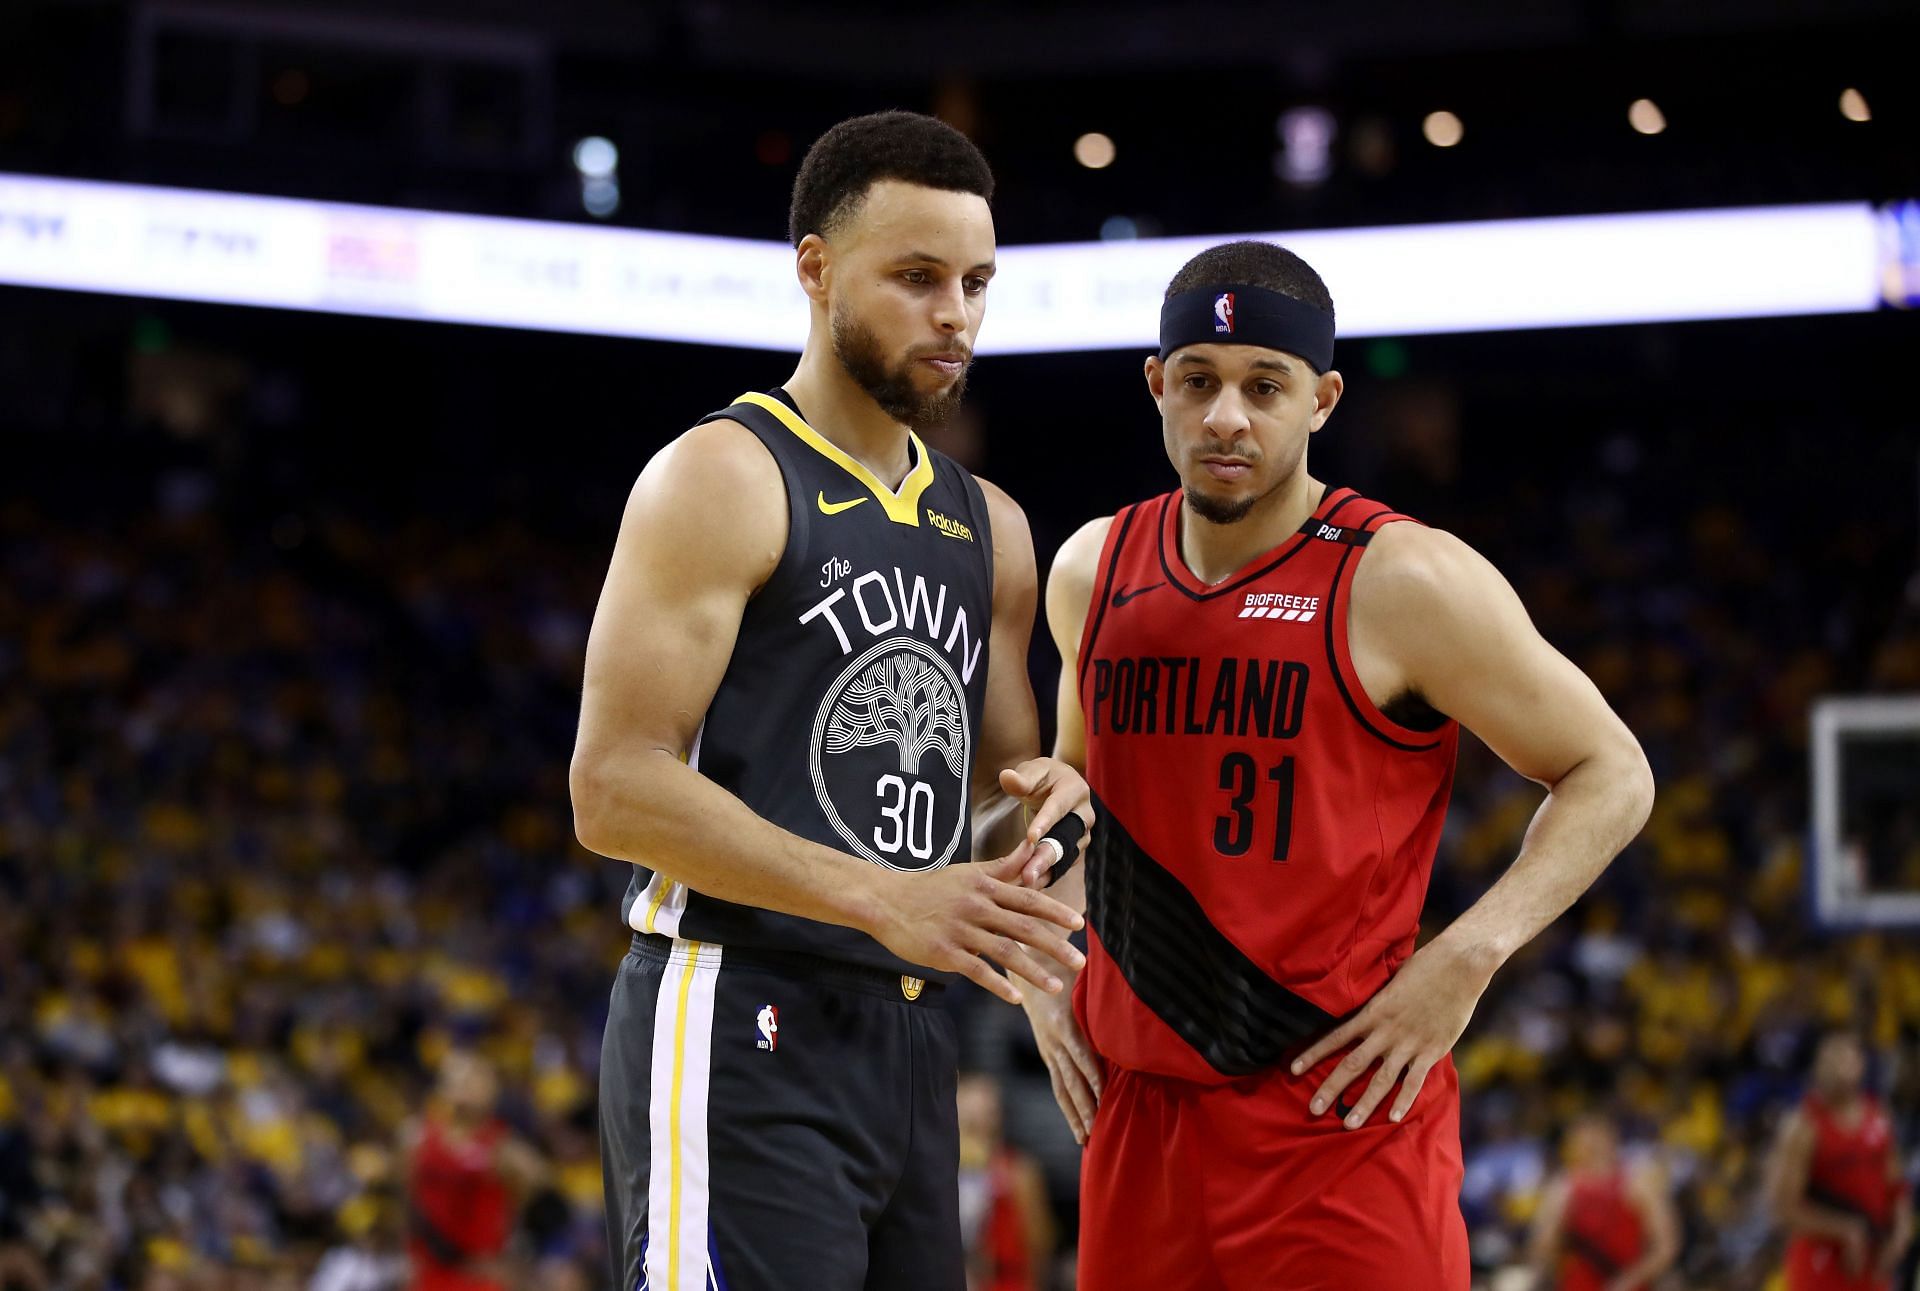 Seth Curry discusses the likelihood of Steph Curry breaking the three-point record in the City of Brotherly Love